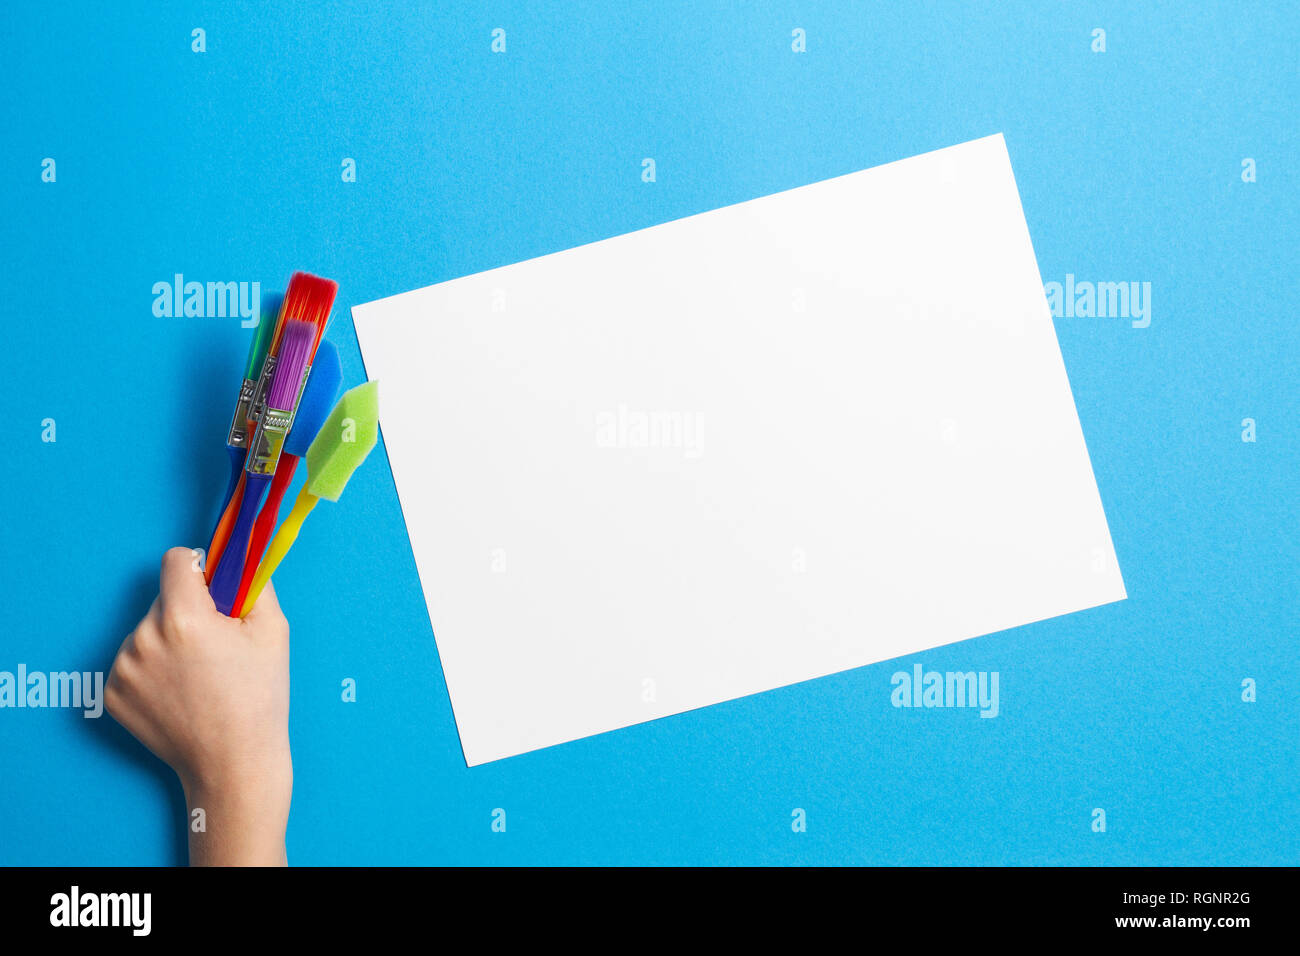 Child hand with colorful paintbrushes and blank white paper sheet on blue background Stock Photo